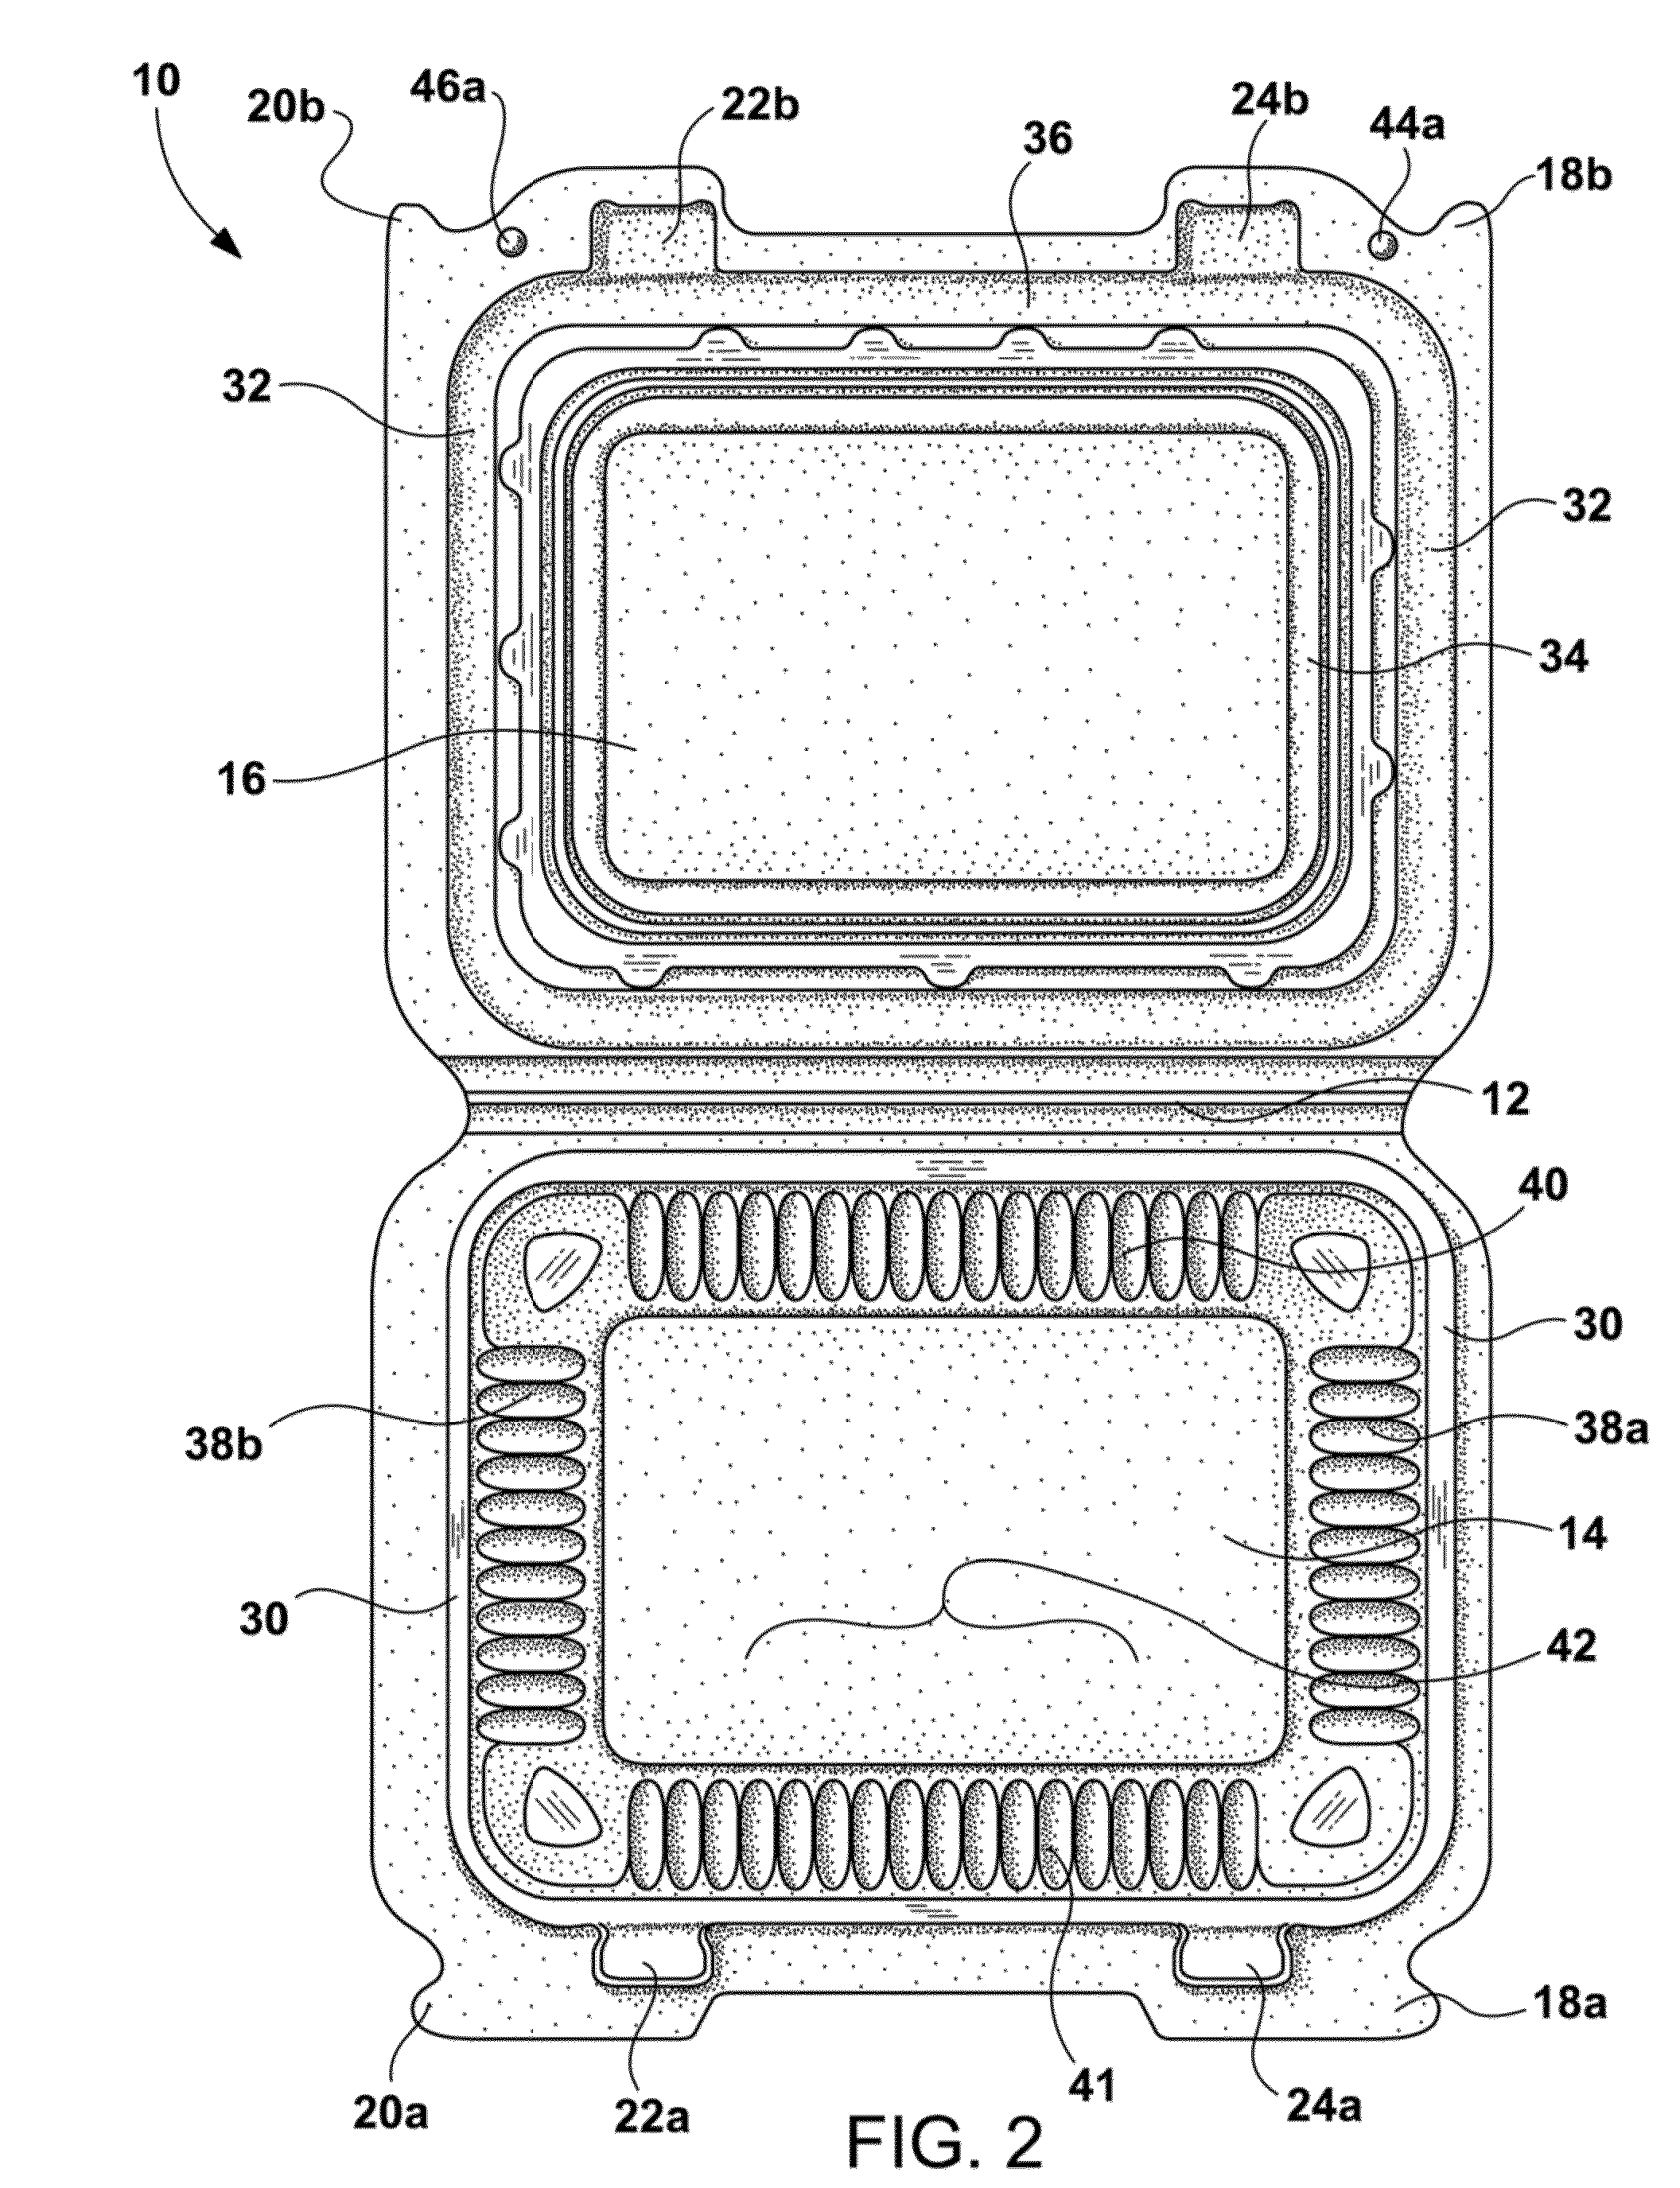 One-Piece Food Container having an Integral Hinge with Latching Mechanisms and a Full Perimeter Seal